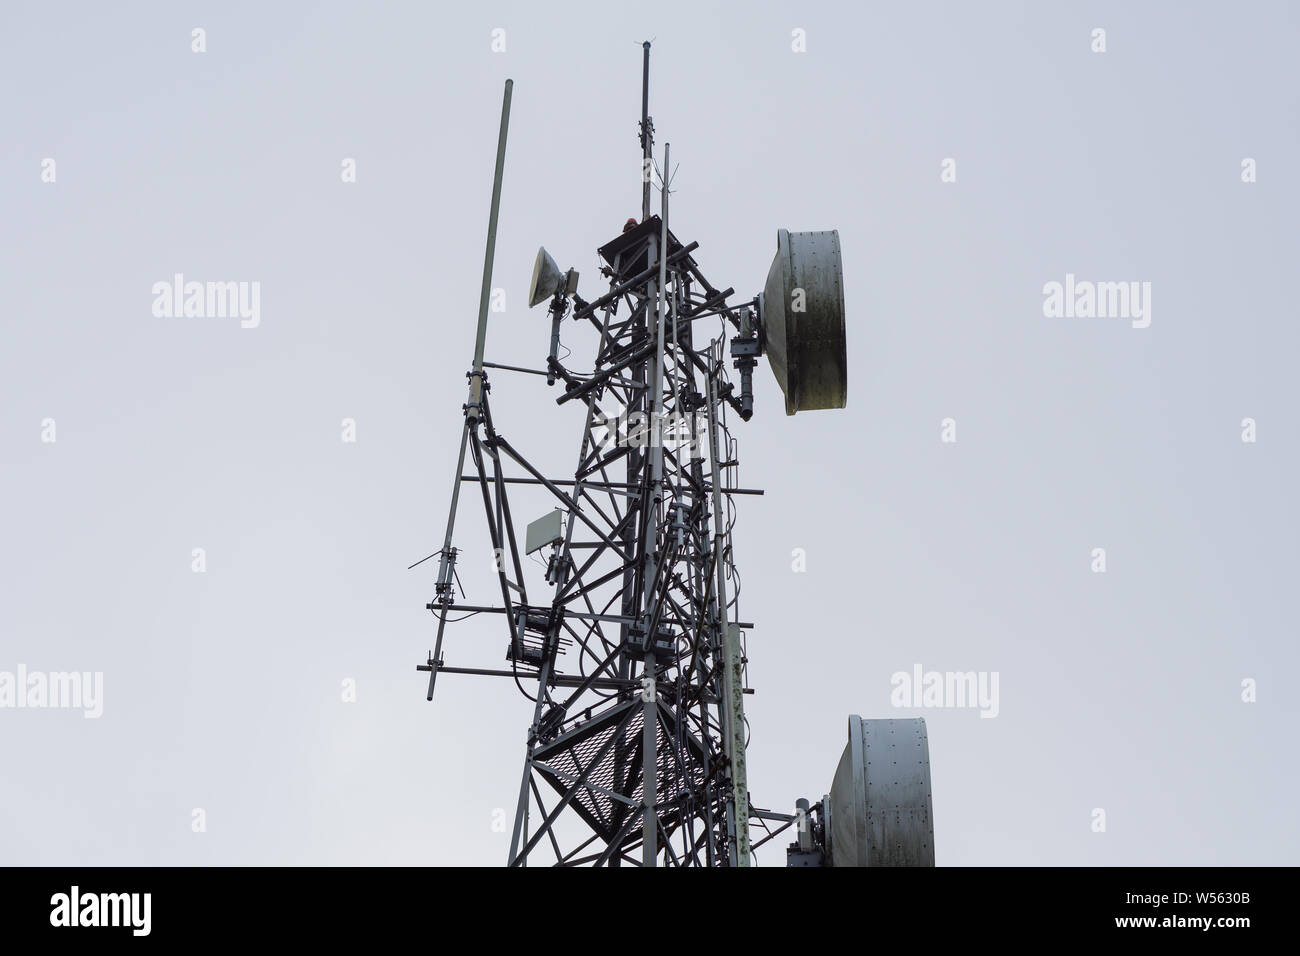 Telecommunication tower, wireless technology or TV antenna in the morning sky. Stock Photo